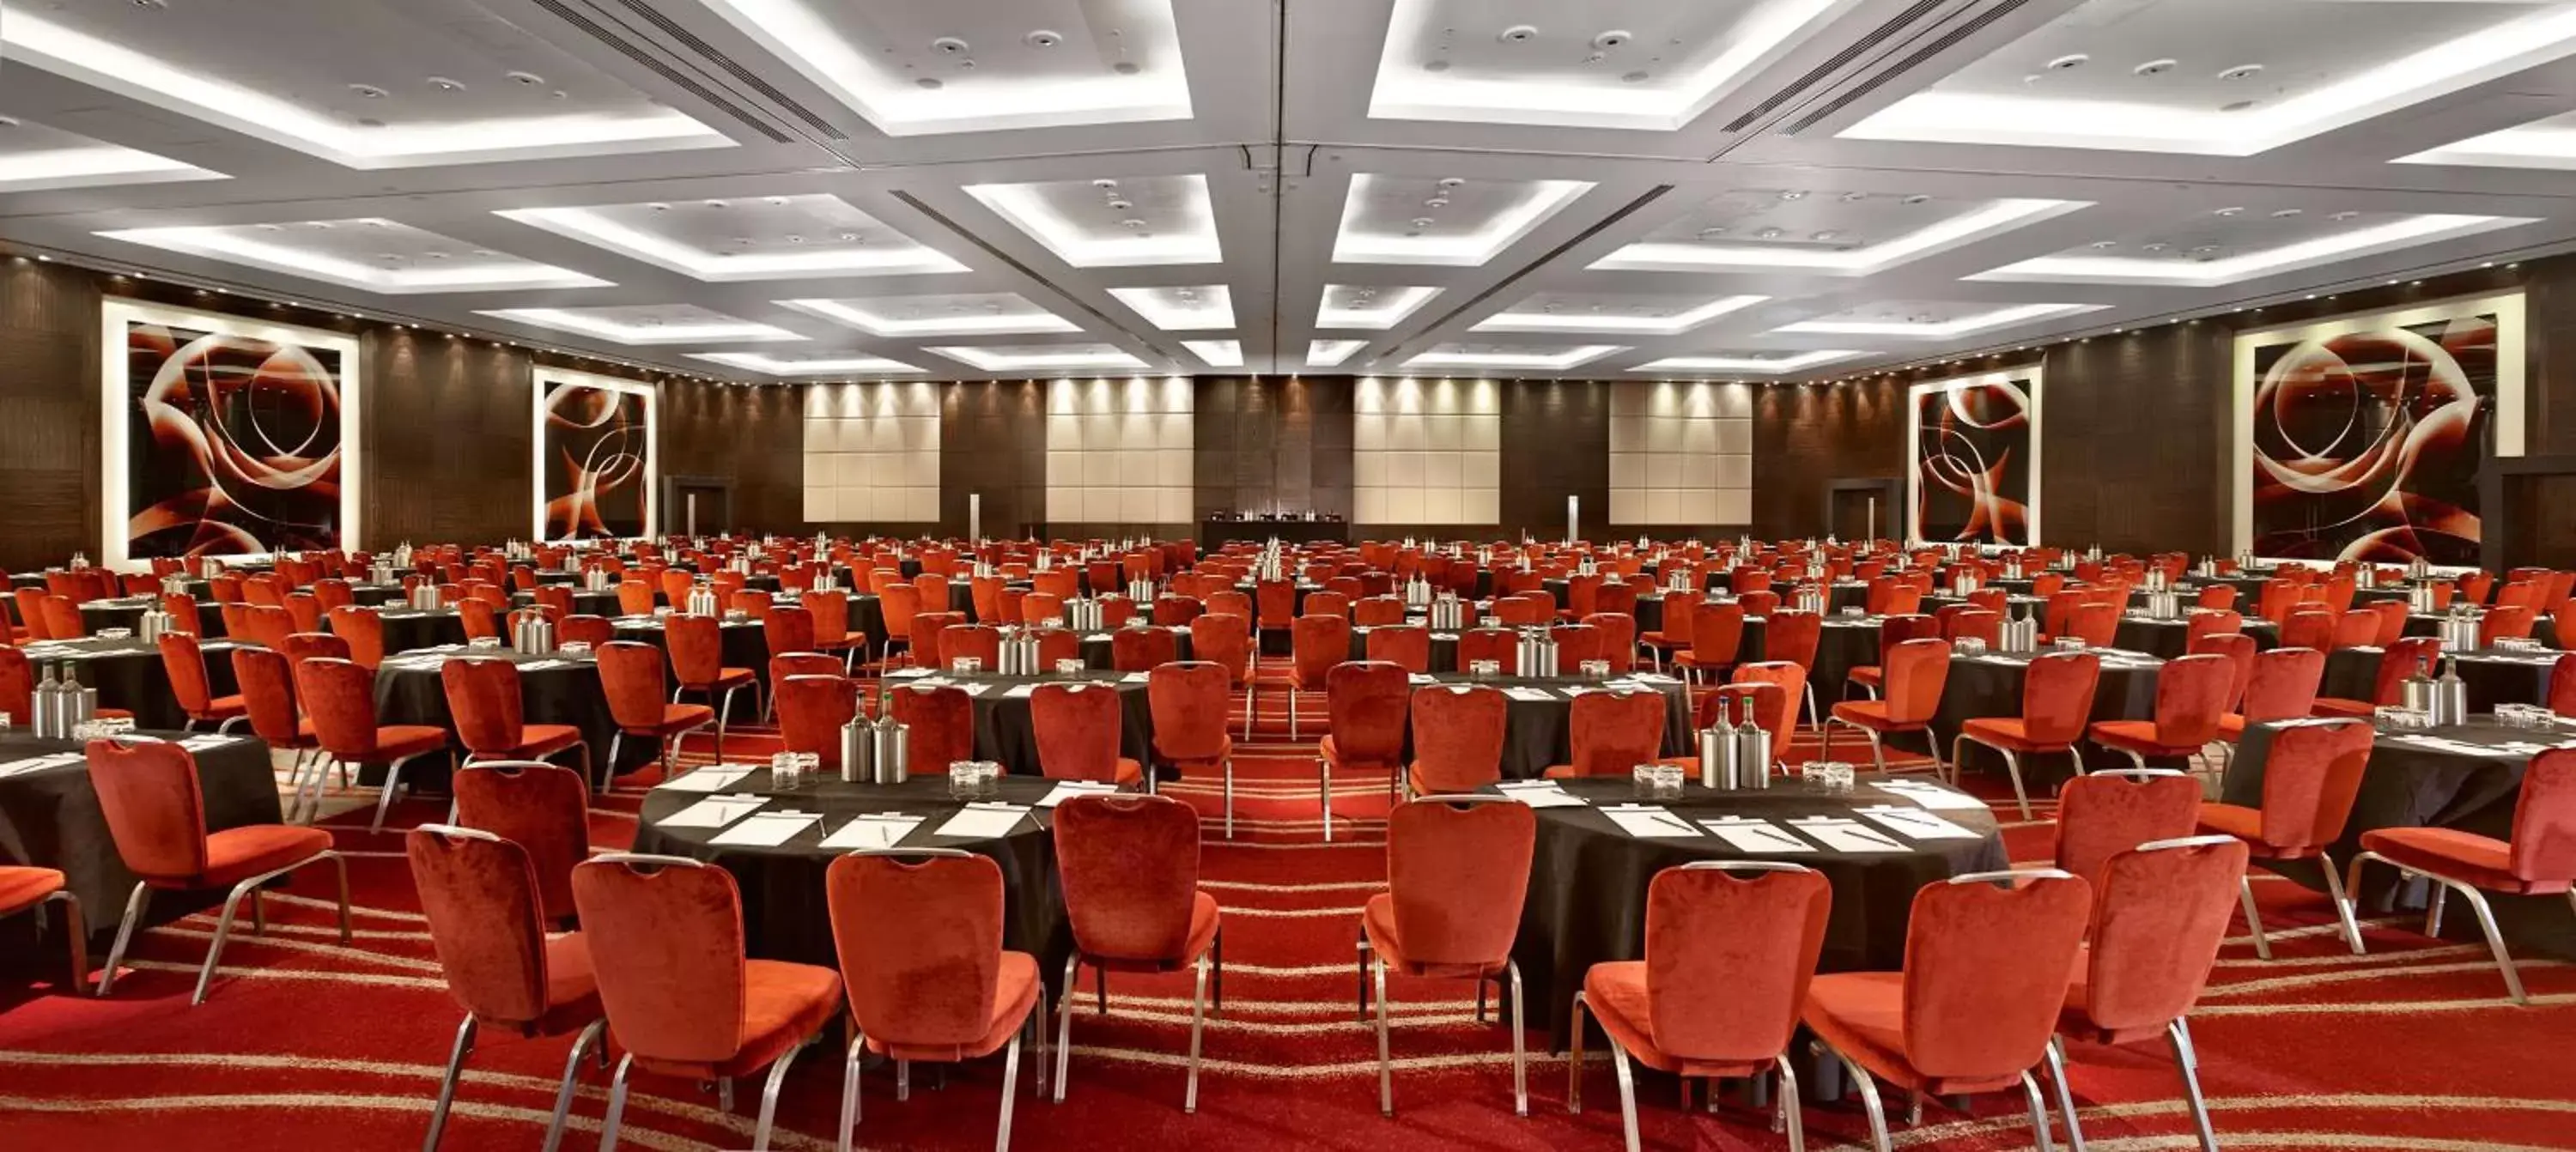 On site, Banquet Facilities in Park Plaza Westminster Bridge London